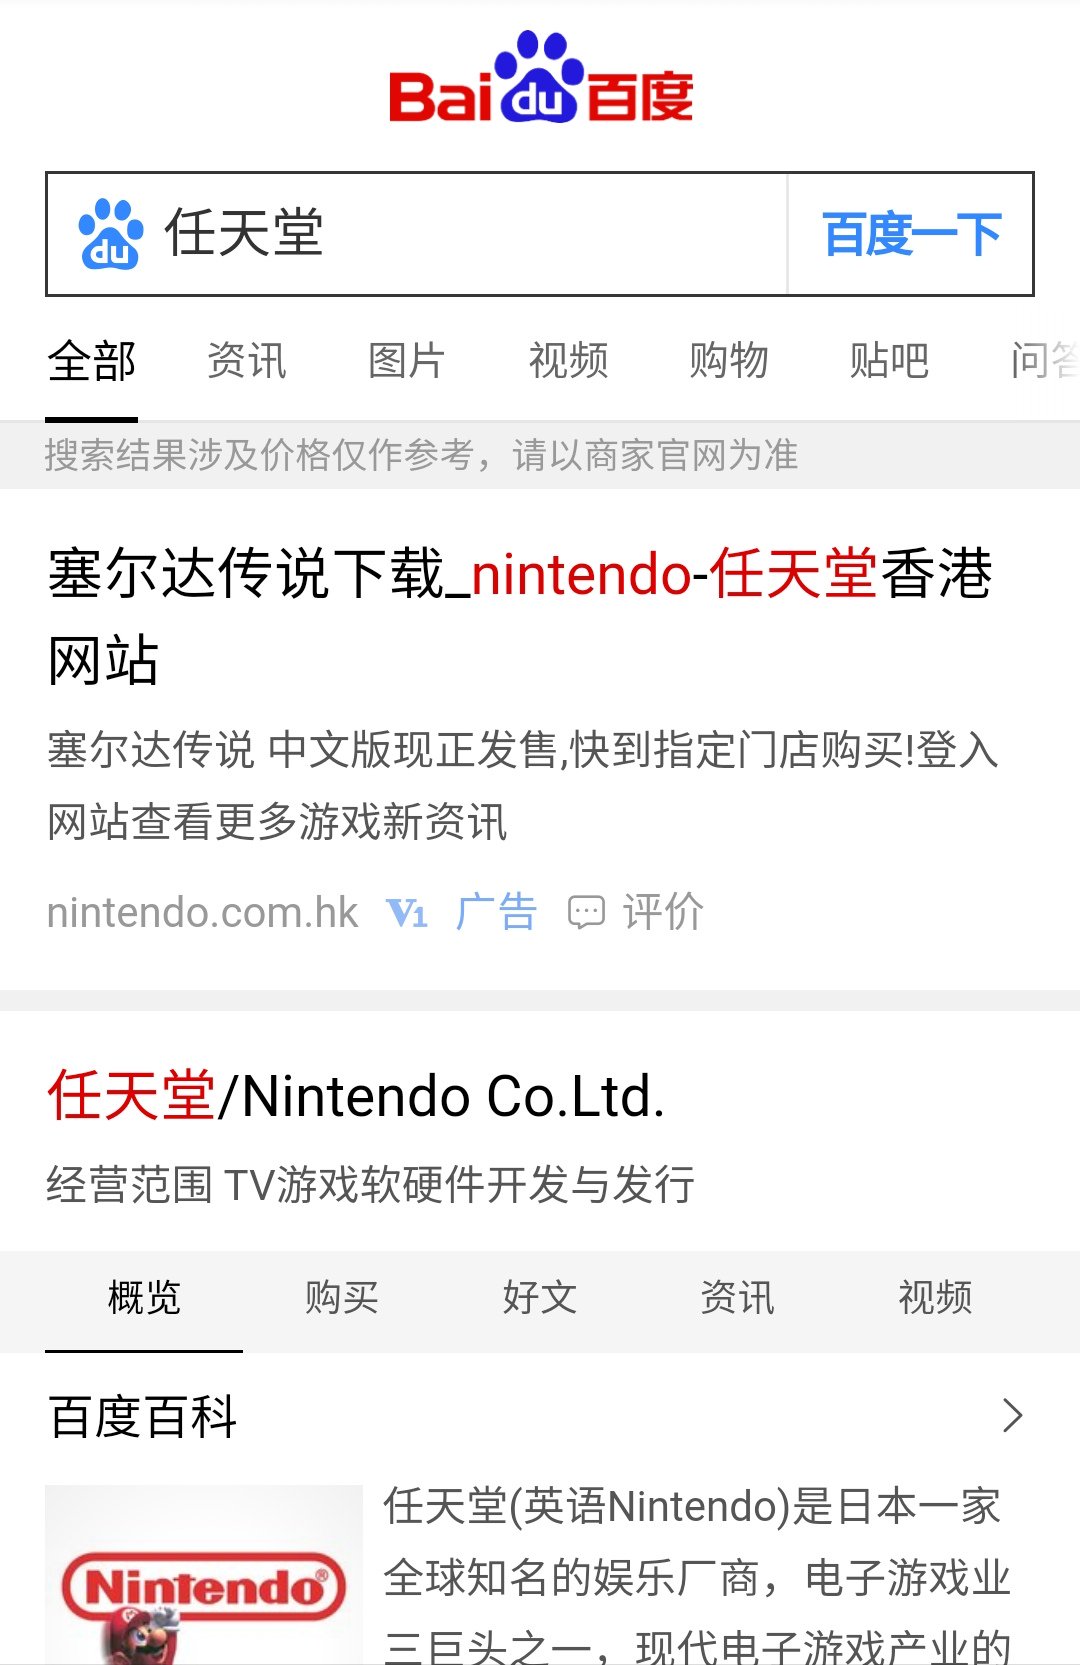 Chinese Nintendo Searching For 任天堂 Nintendo On Baidu And The First Link To Return Will Be A Sponsored Link Going To Nintendo Hk The Titles Vary However The First One